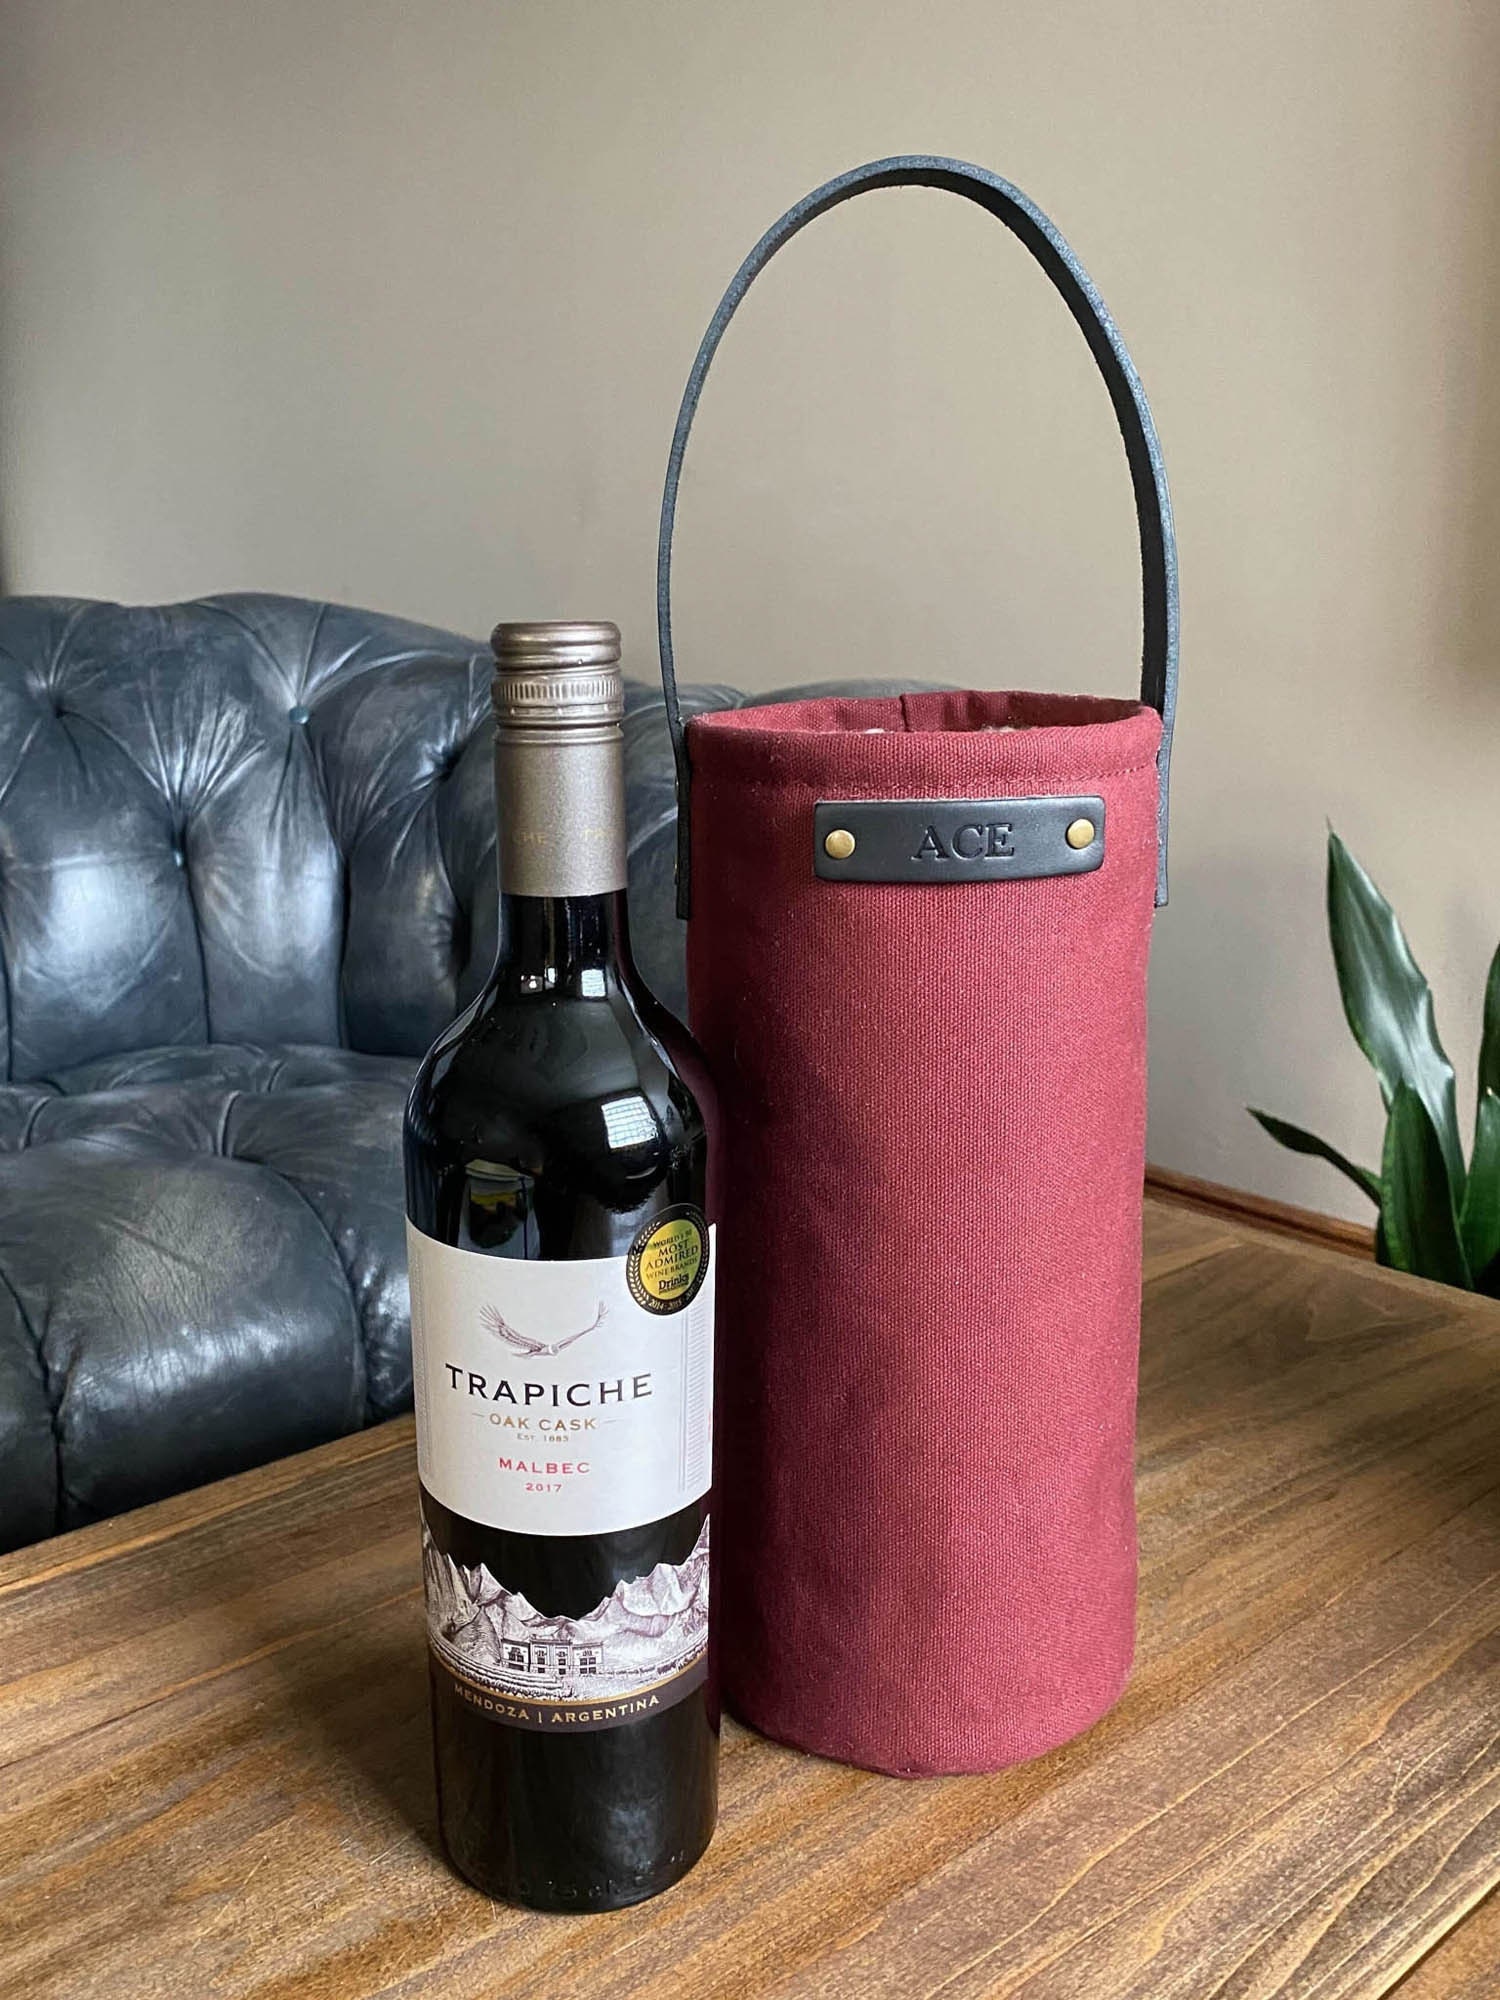 Horizontal Canvas Wine Tote with Leather Closure